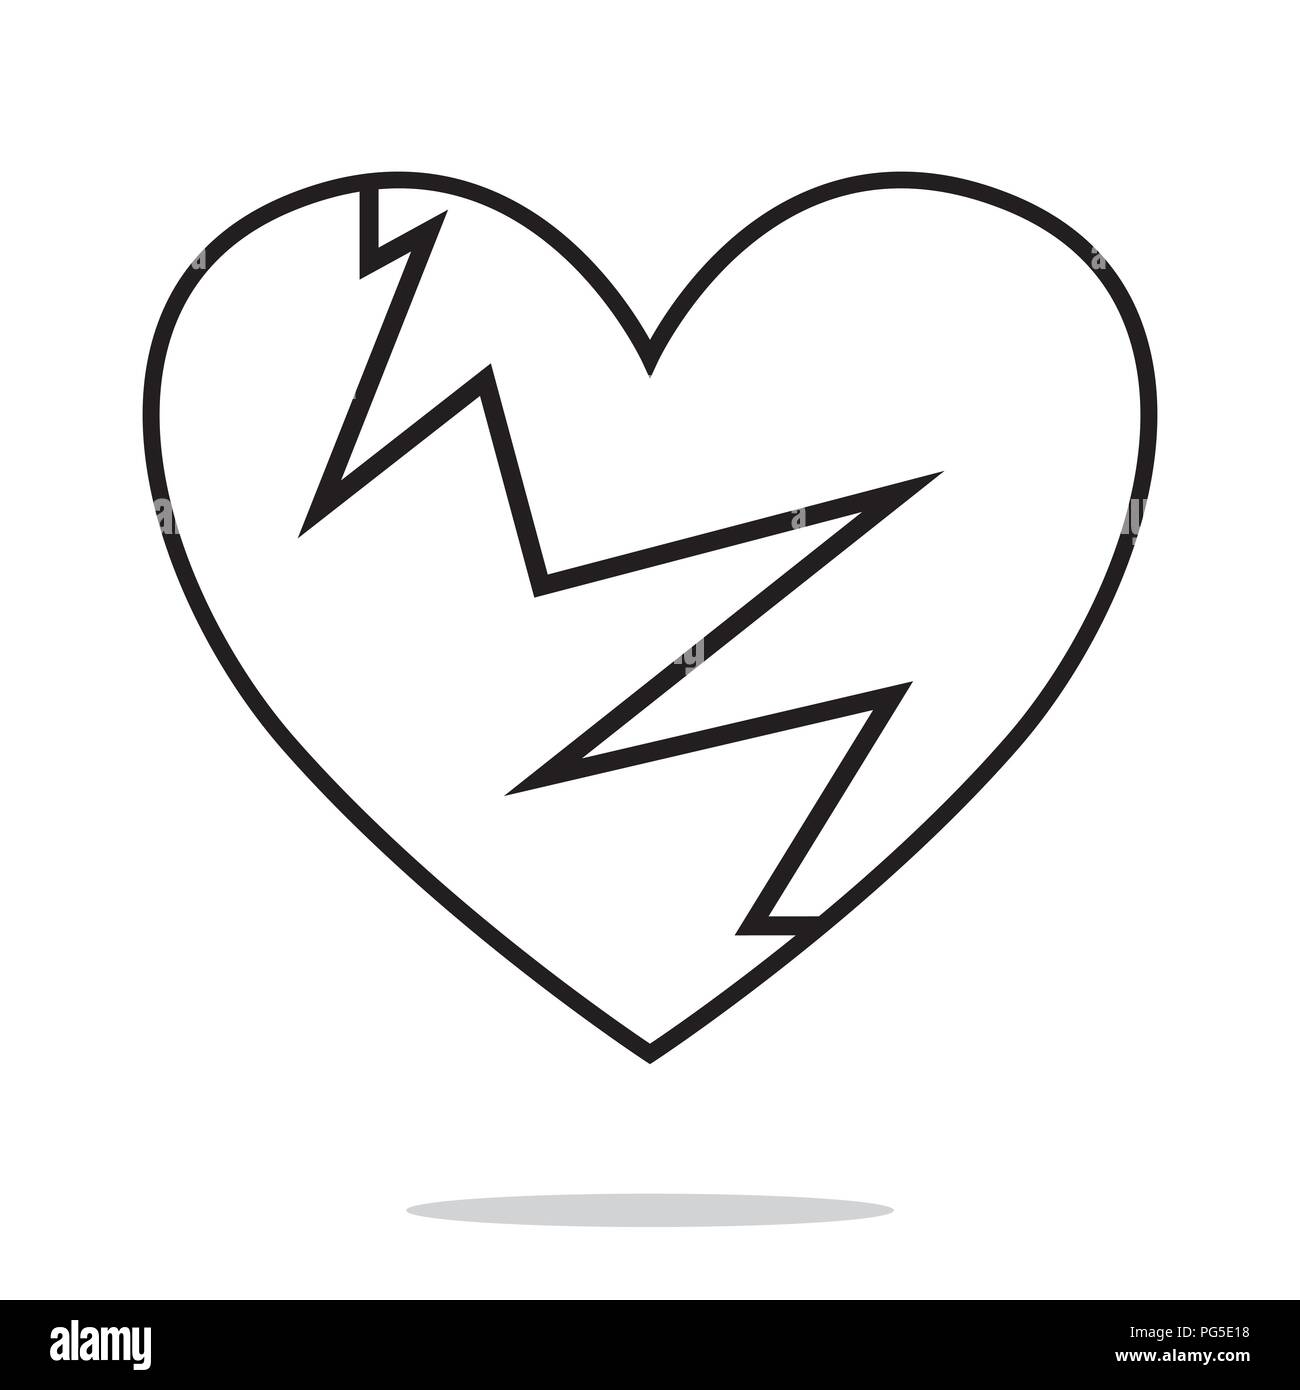 Broken heart lost love Black and White Stock Photos  Images  Alamy